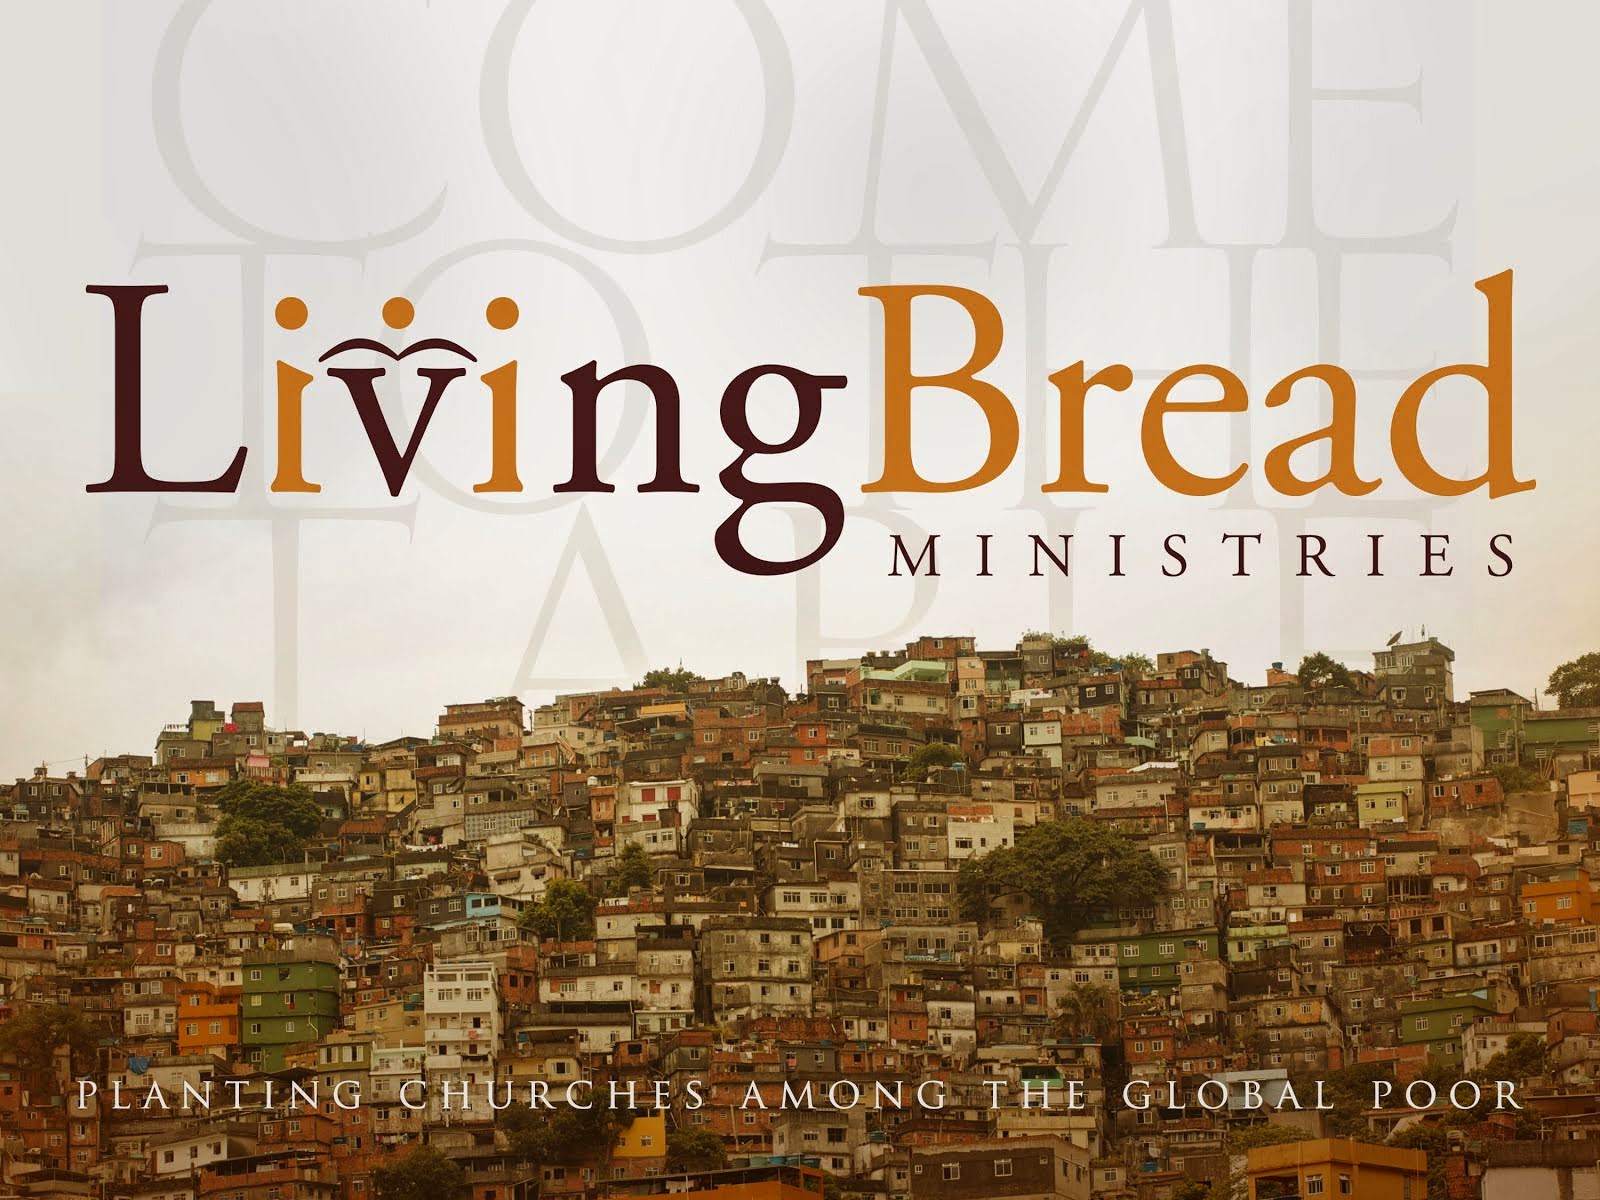 Support Living Bread